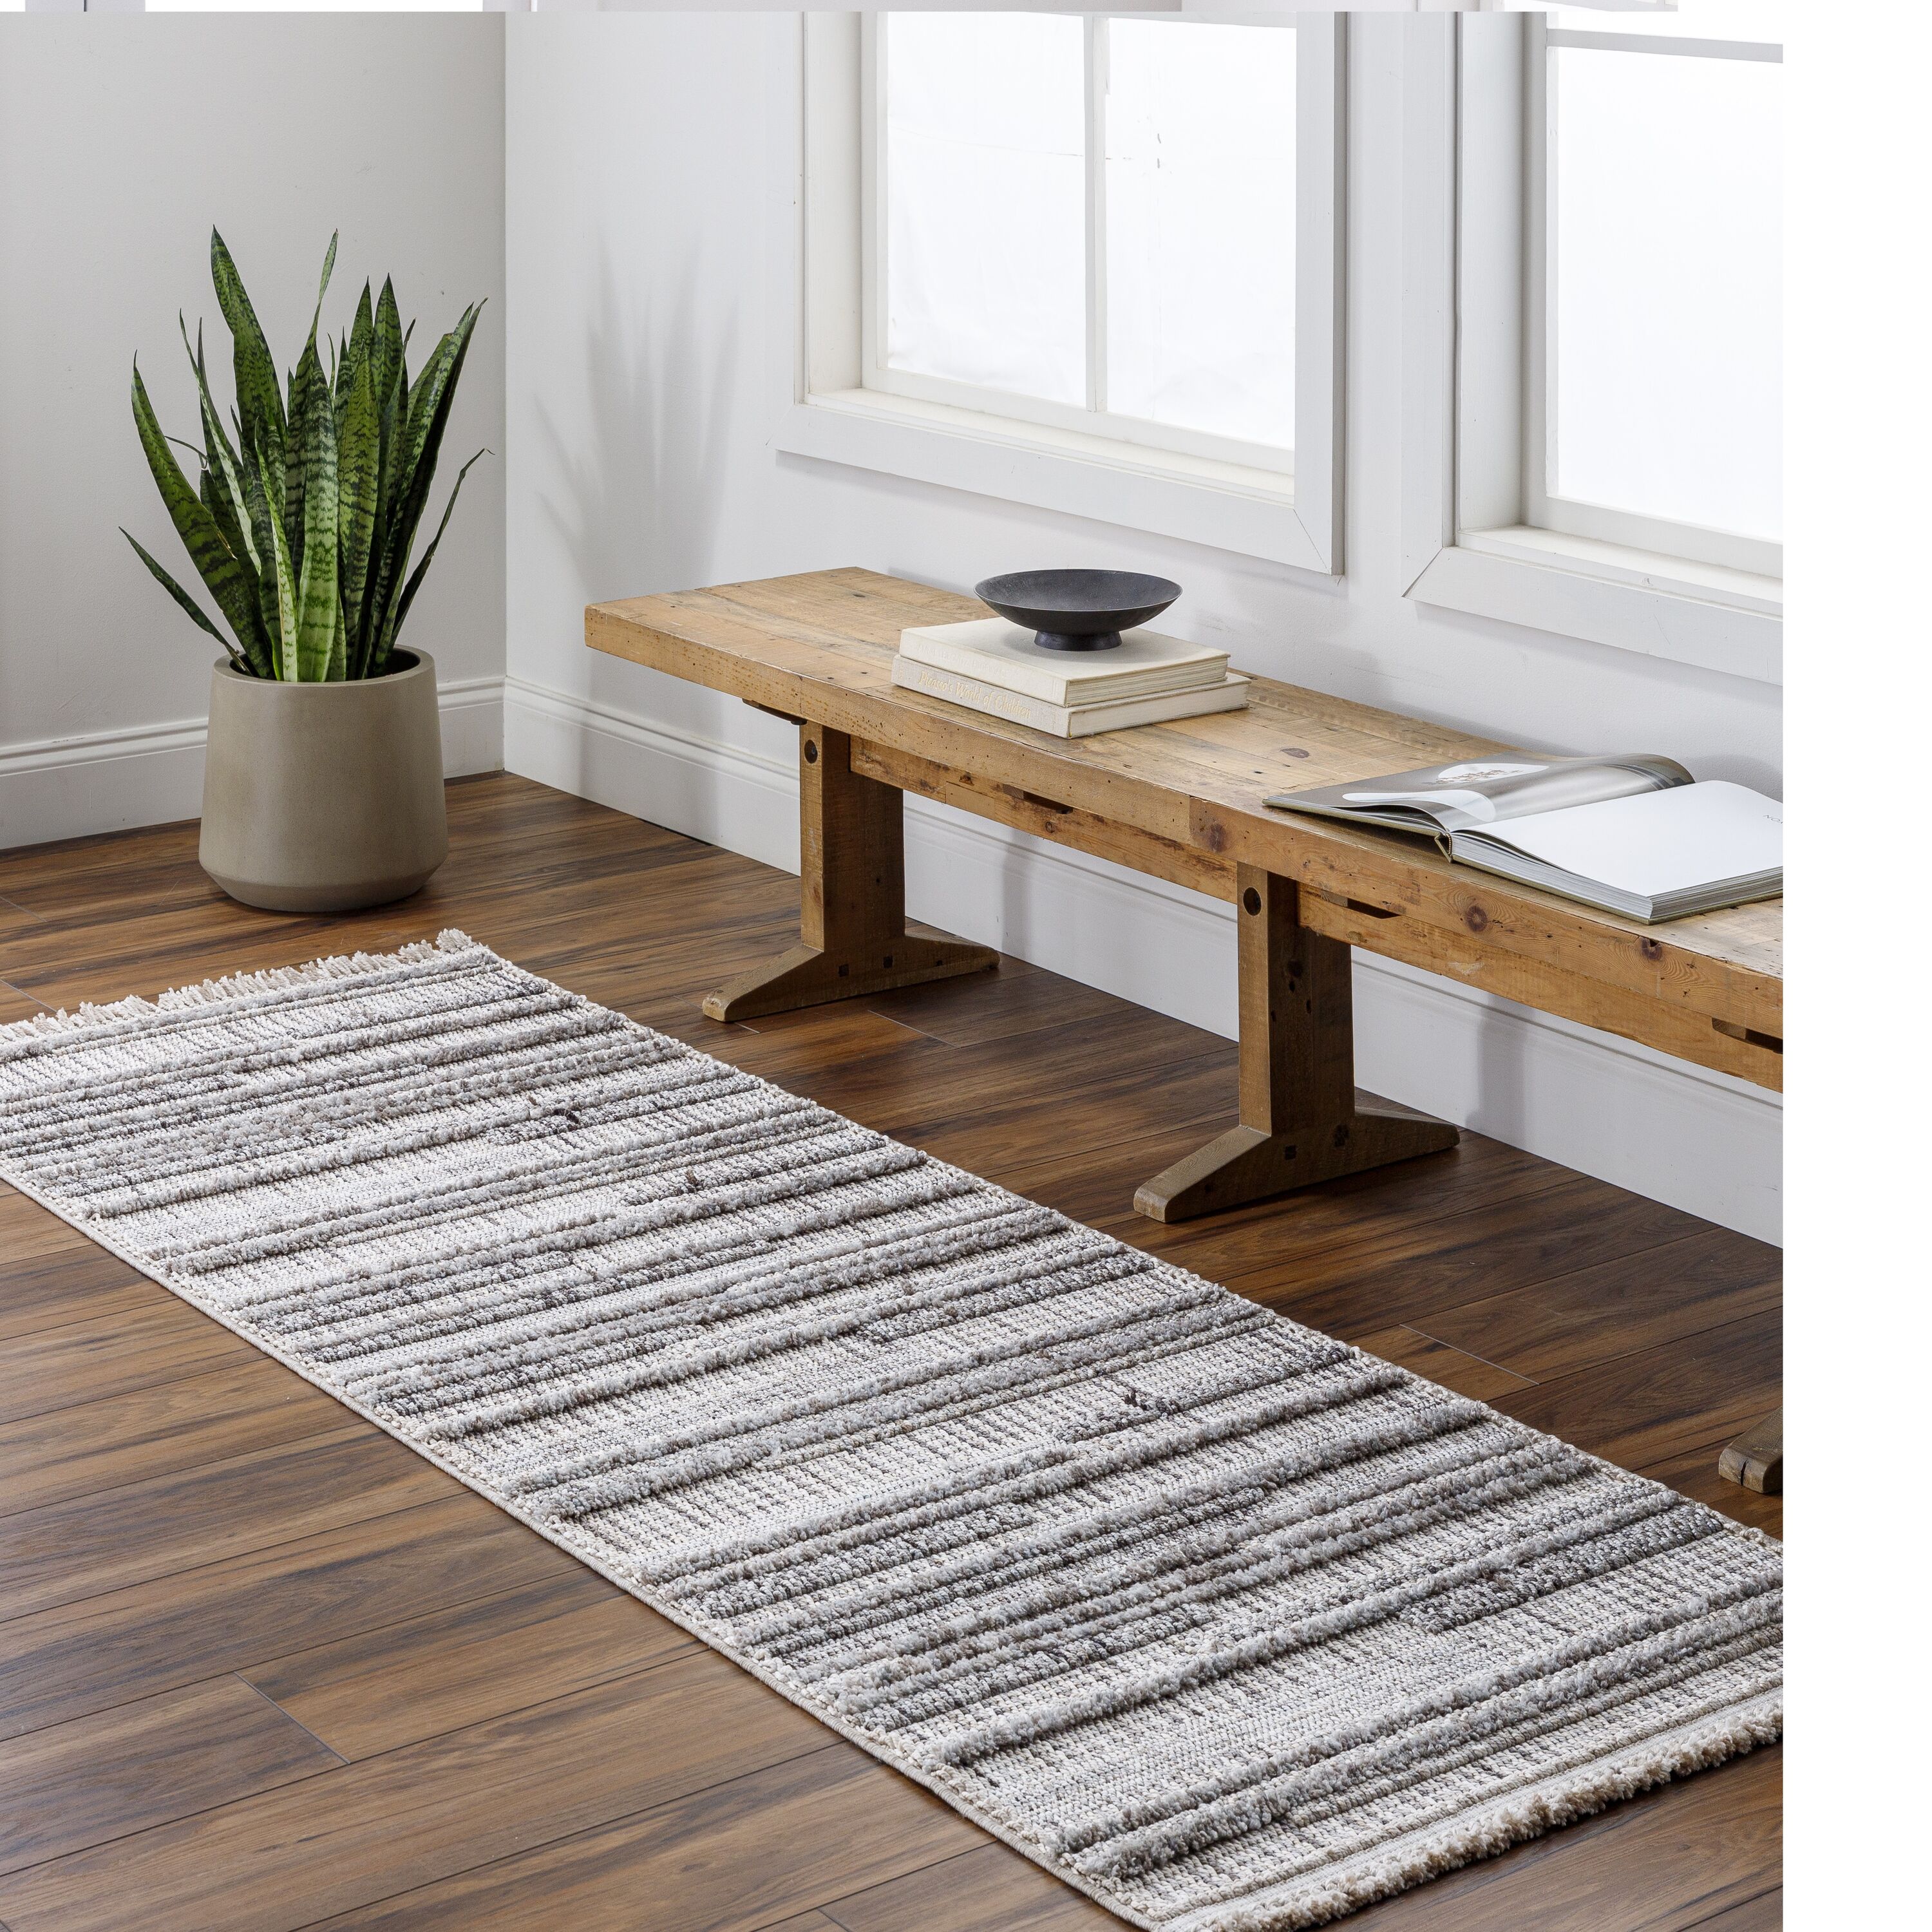 Rug Rugs X Indoor Stripe 8 Origin the Runner 21 Smoky department Gray (ft) Performance in STAINMASTER Sm 2 at with Stripe